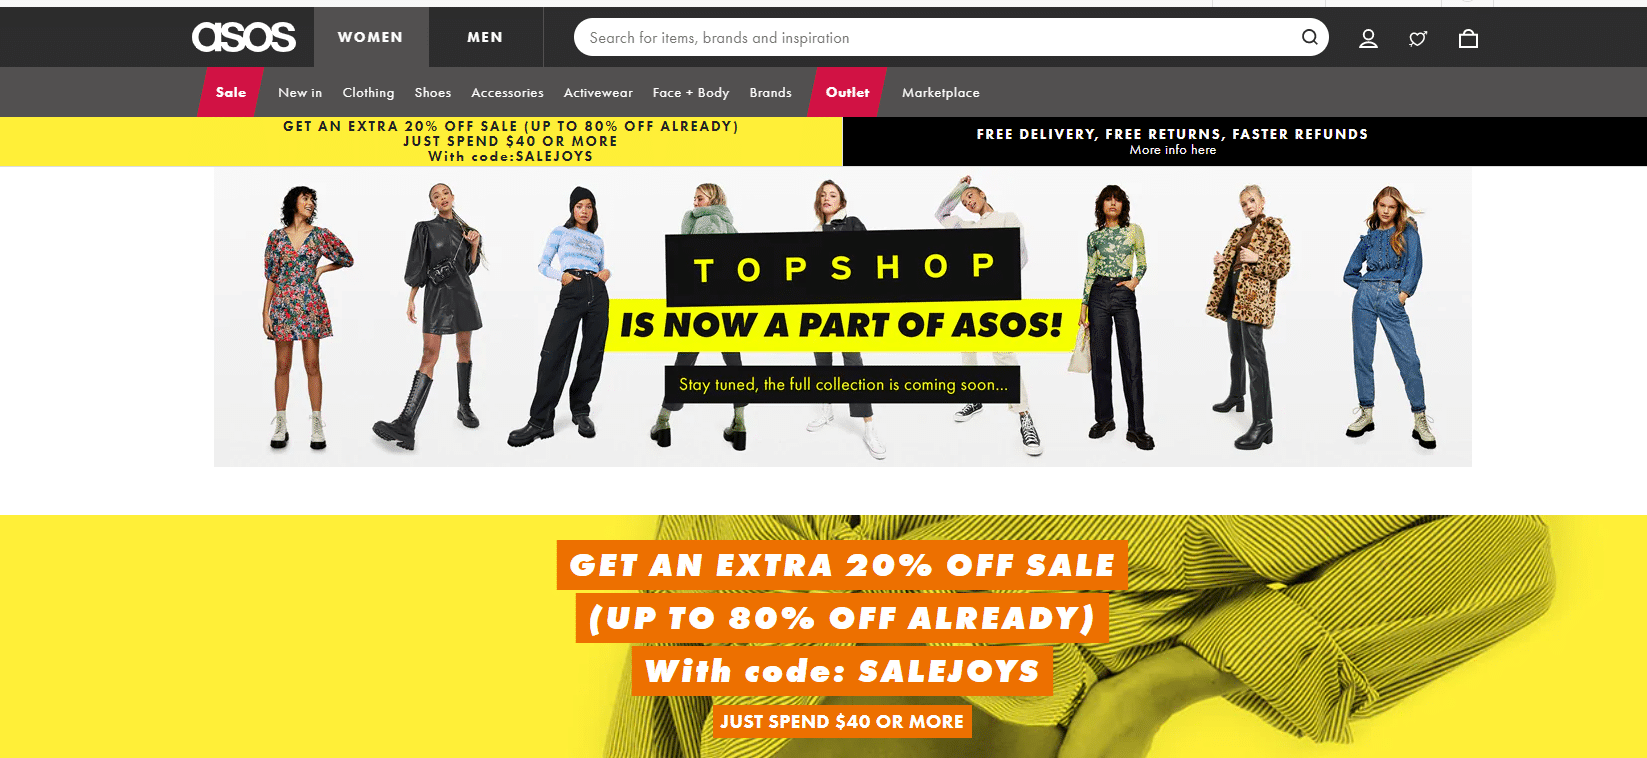 asos 20% off coupon code for sale items